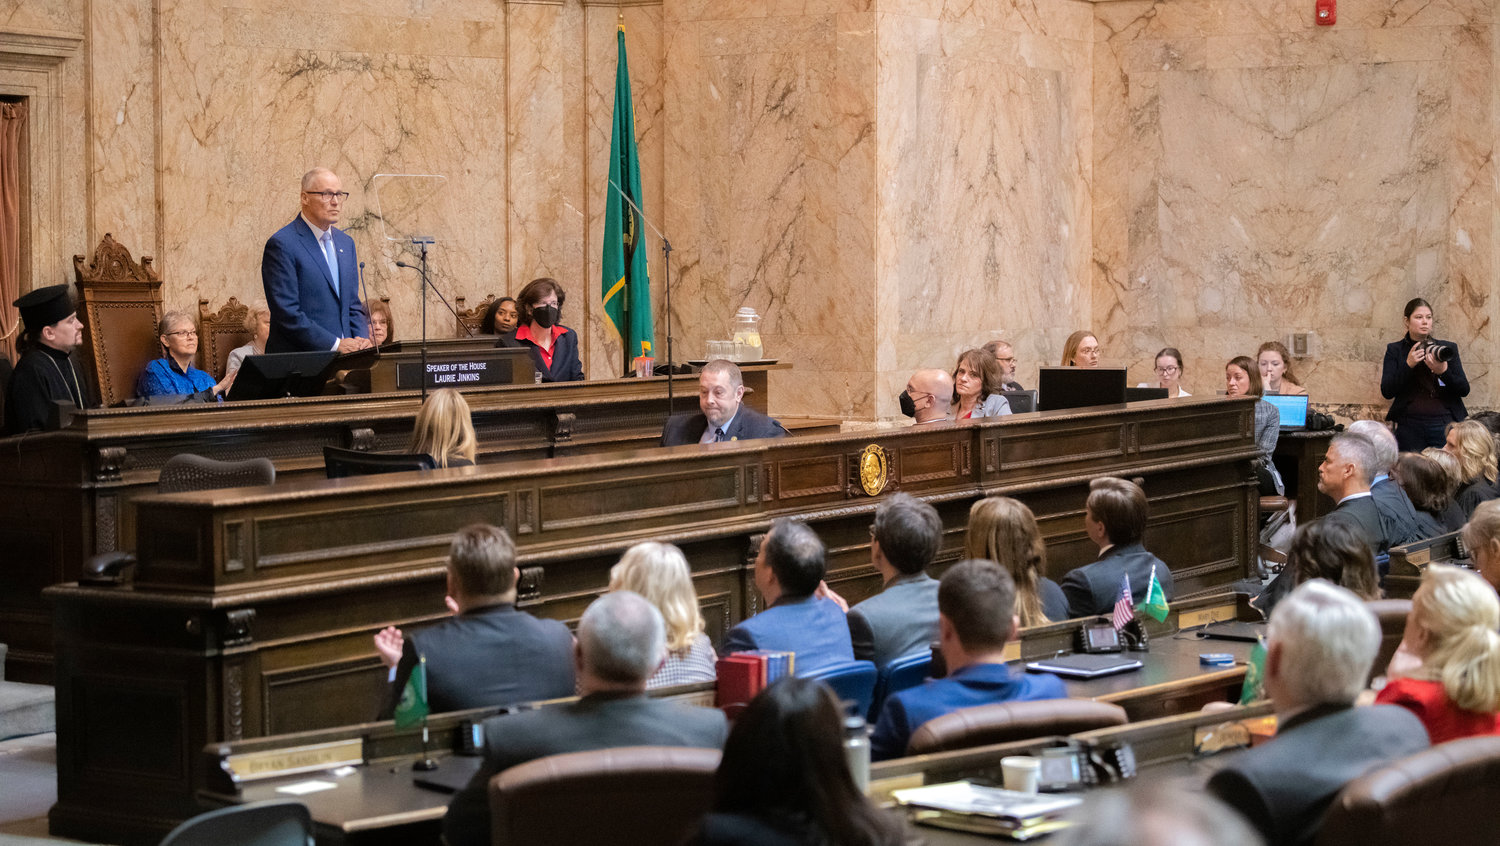 Governor Jay Inslee delivers his 2023 State of the State speech at a joint session of the House and Senate during the first in-person session since 2020 Tuesday afternoon in Olympia.